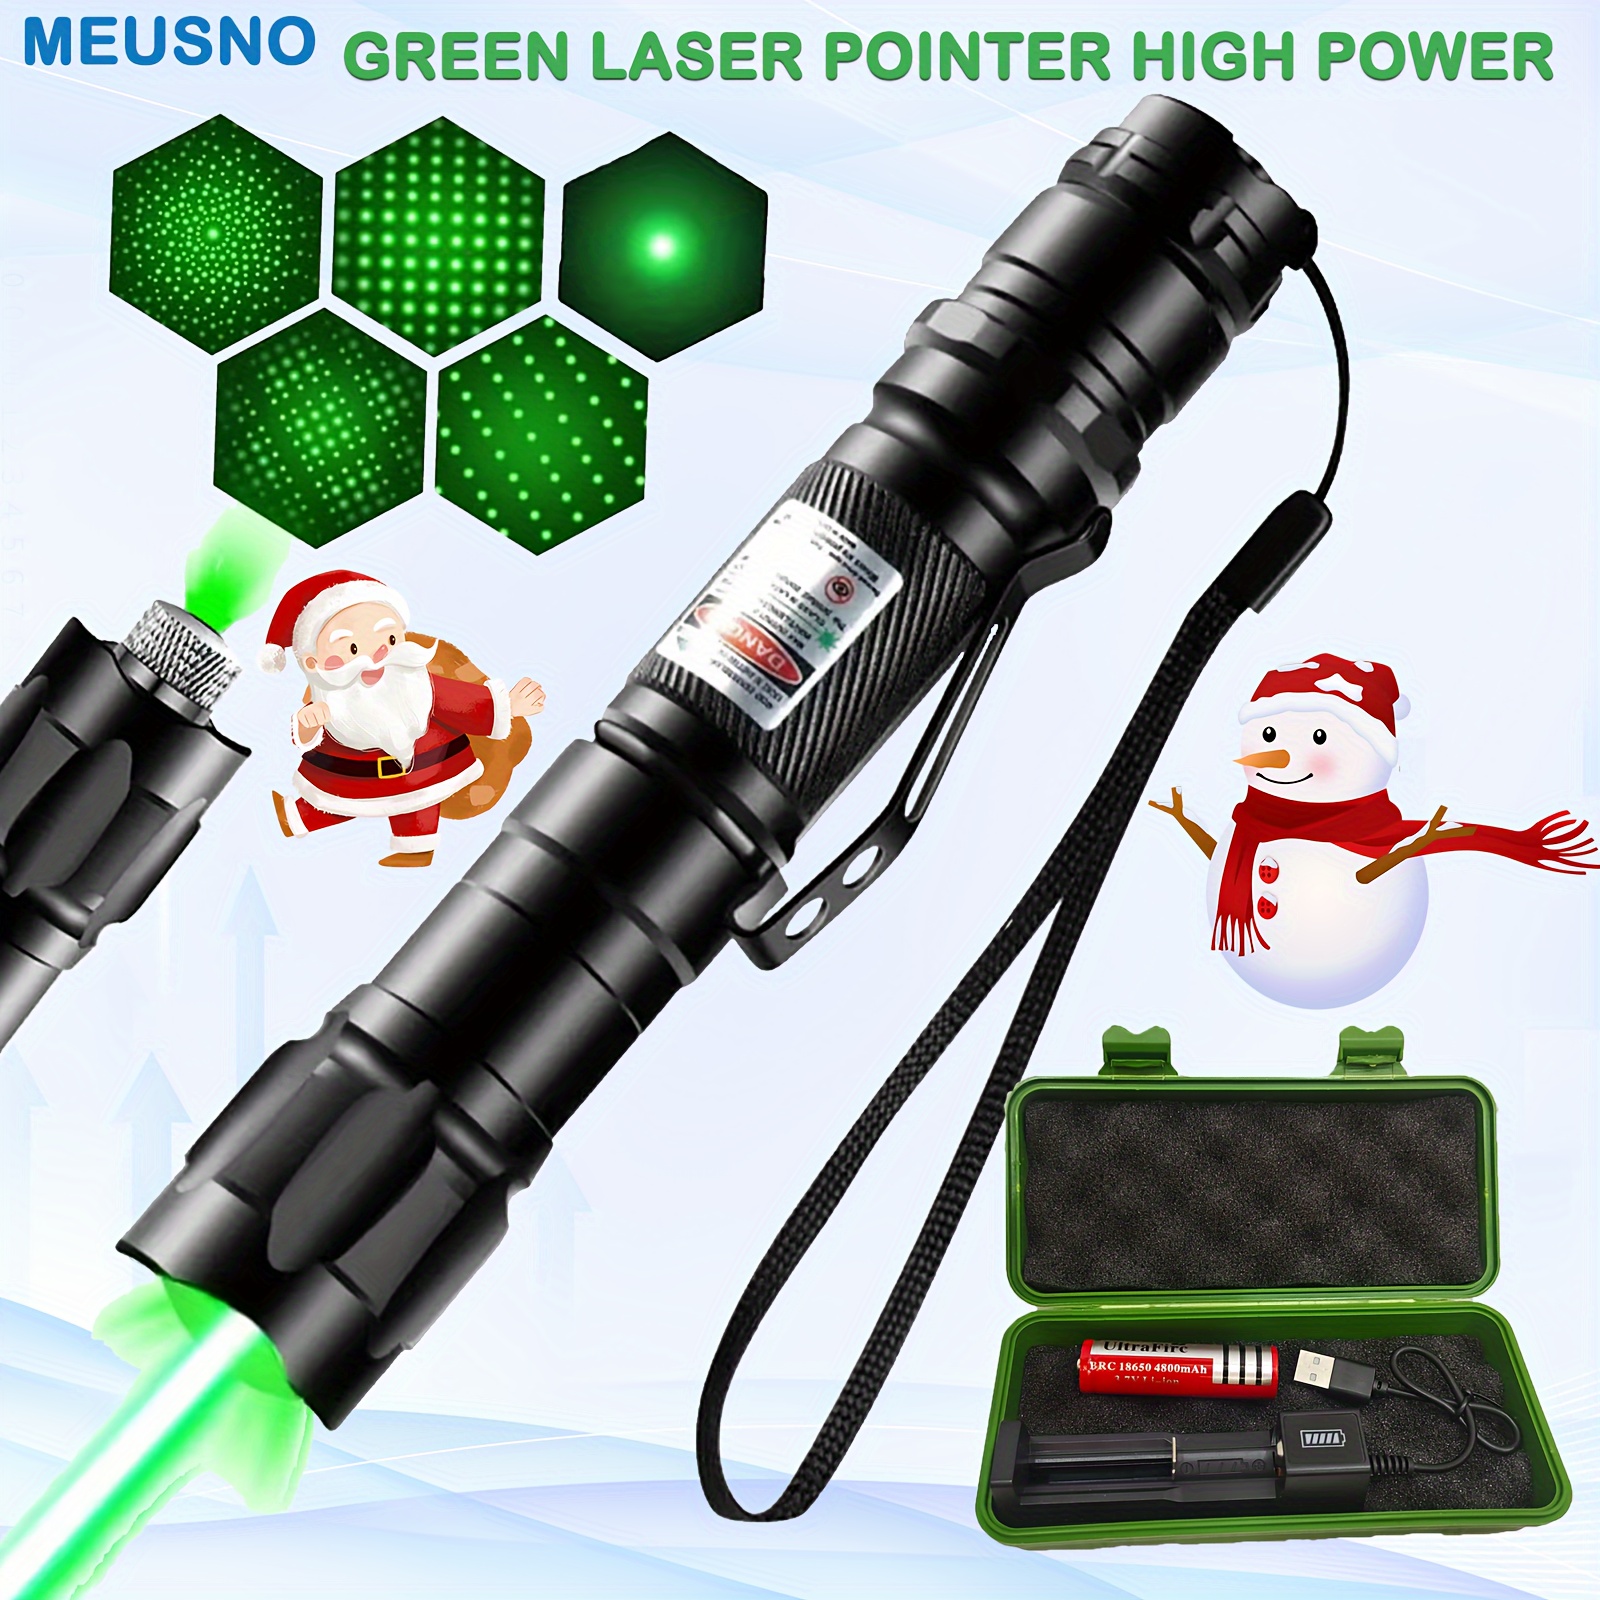 Green Laser Pointer High Power, Rechargeable Long Range 10000 Feet High  Power Laser Pointer for Night Astronomy Outdoor Camping Presentations